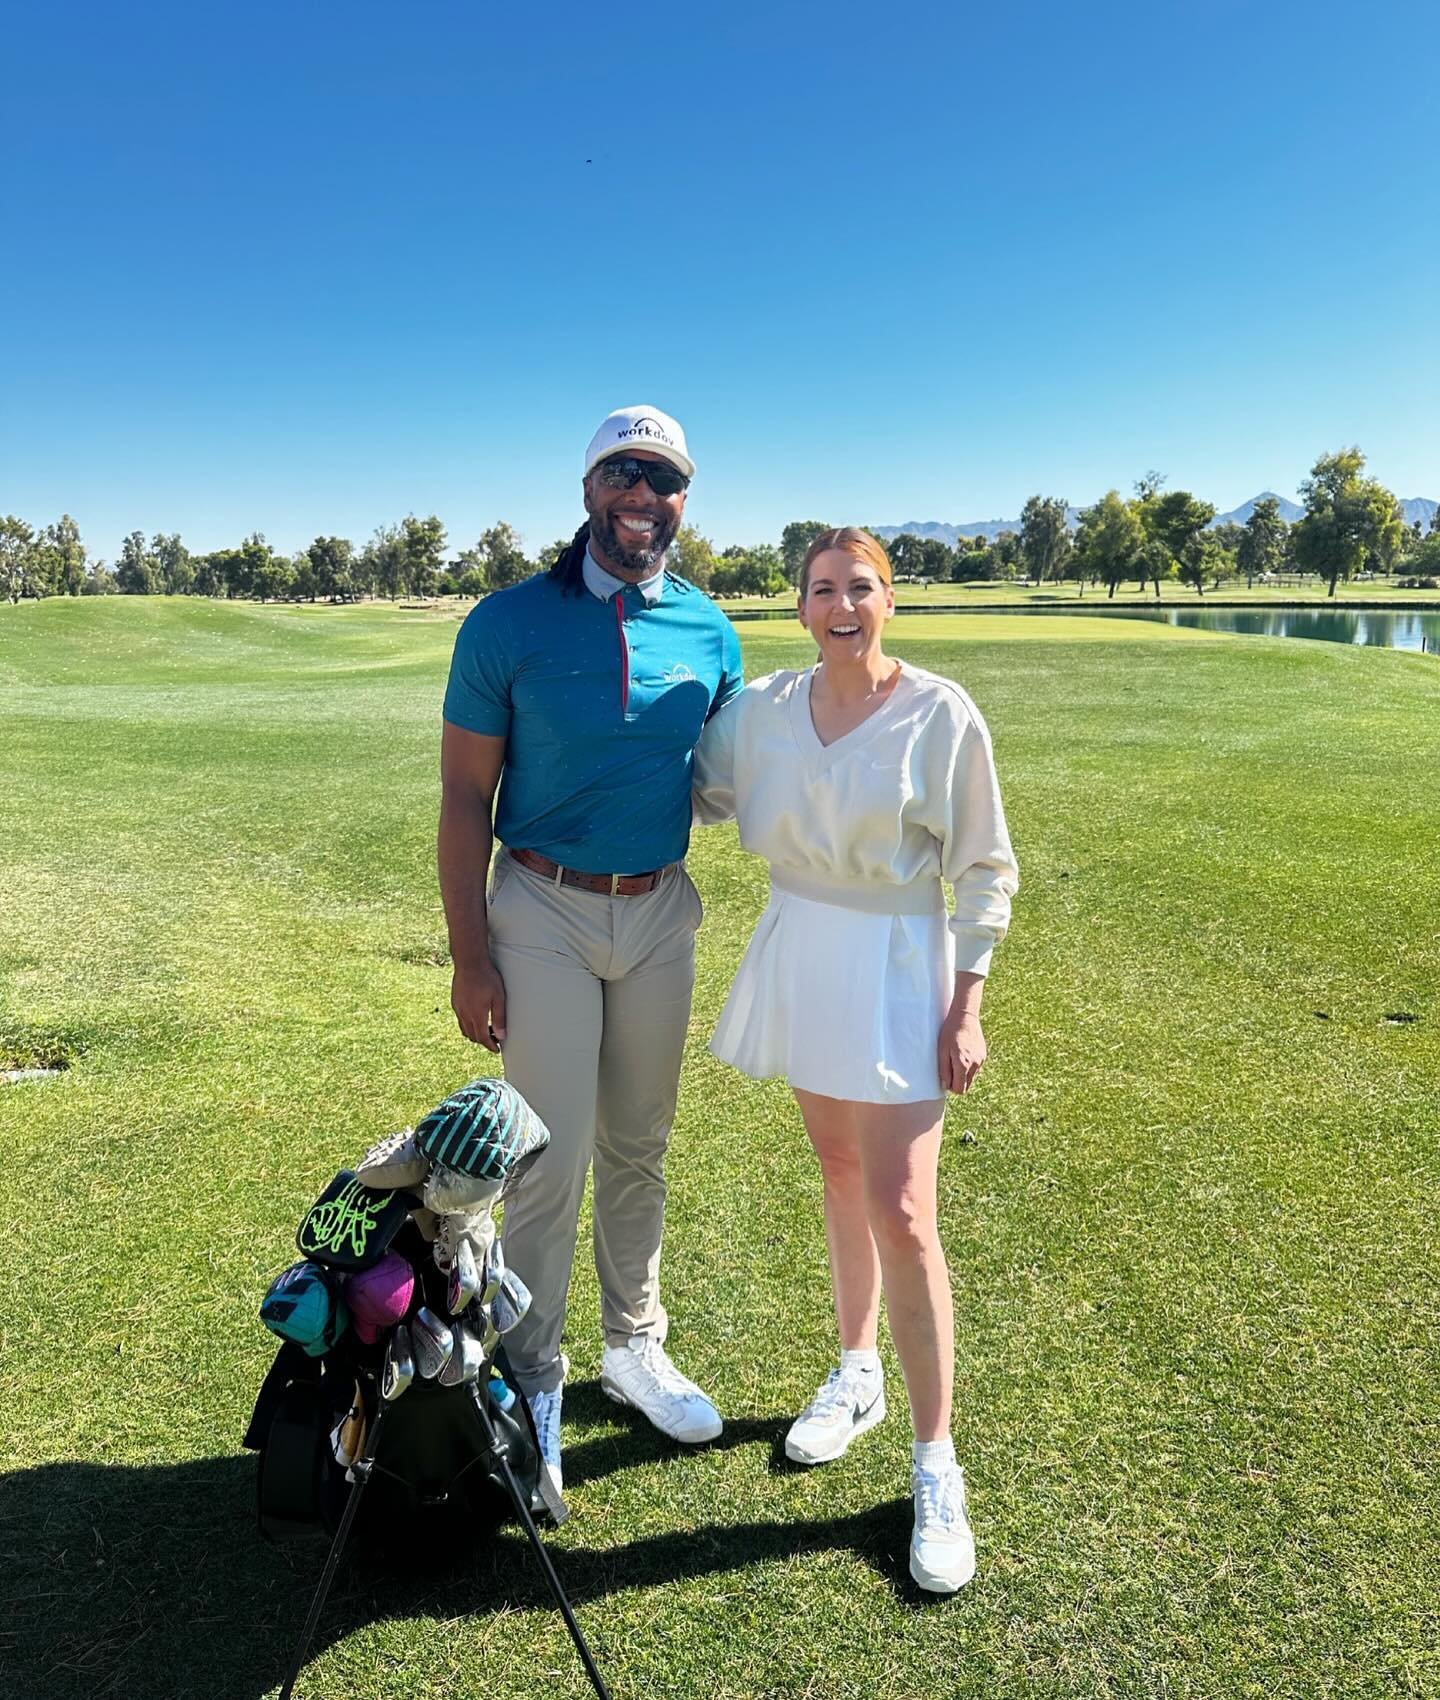 @LarryFitzgerald is ON THE TEE! Coming soon to @GolfDigest.